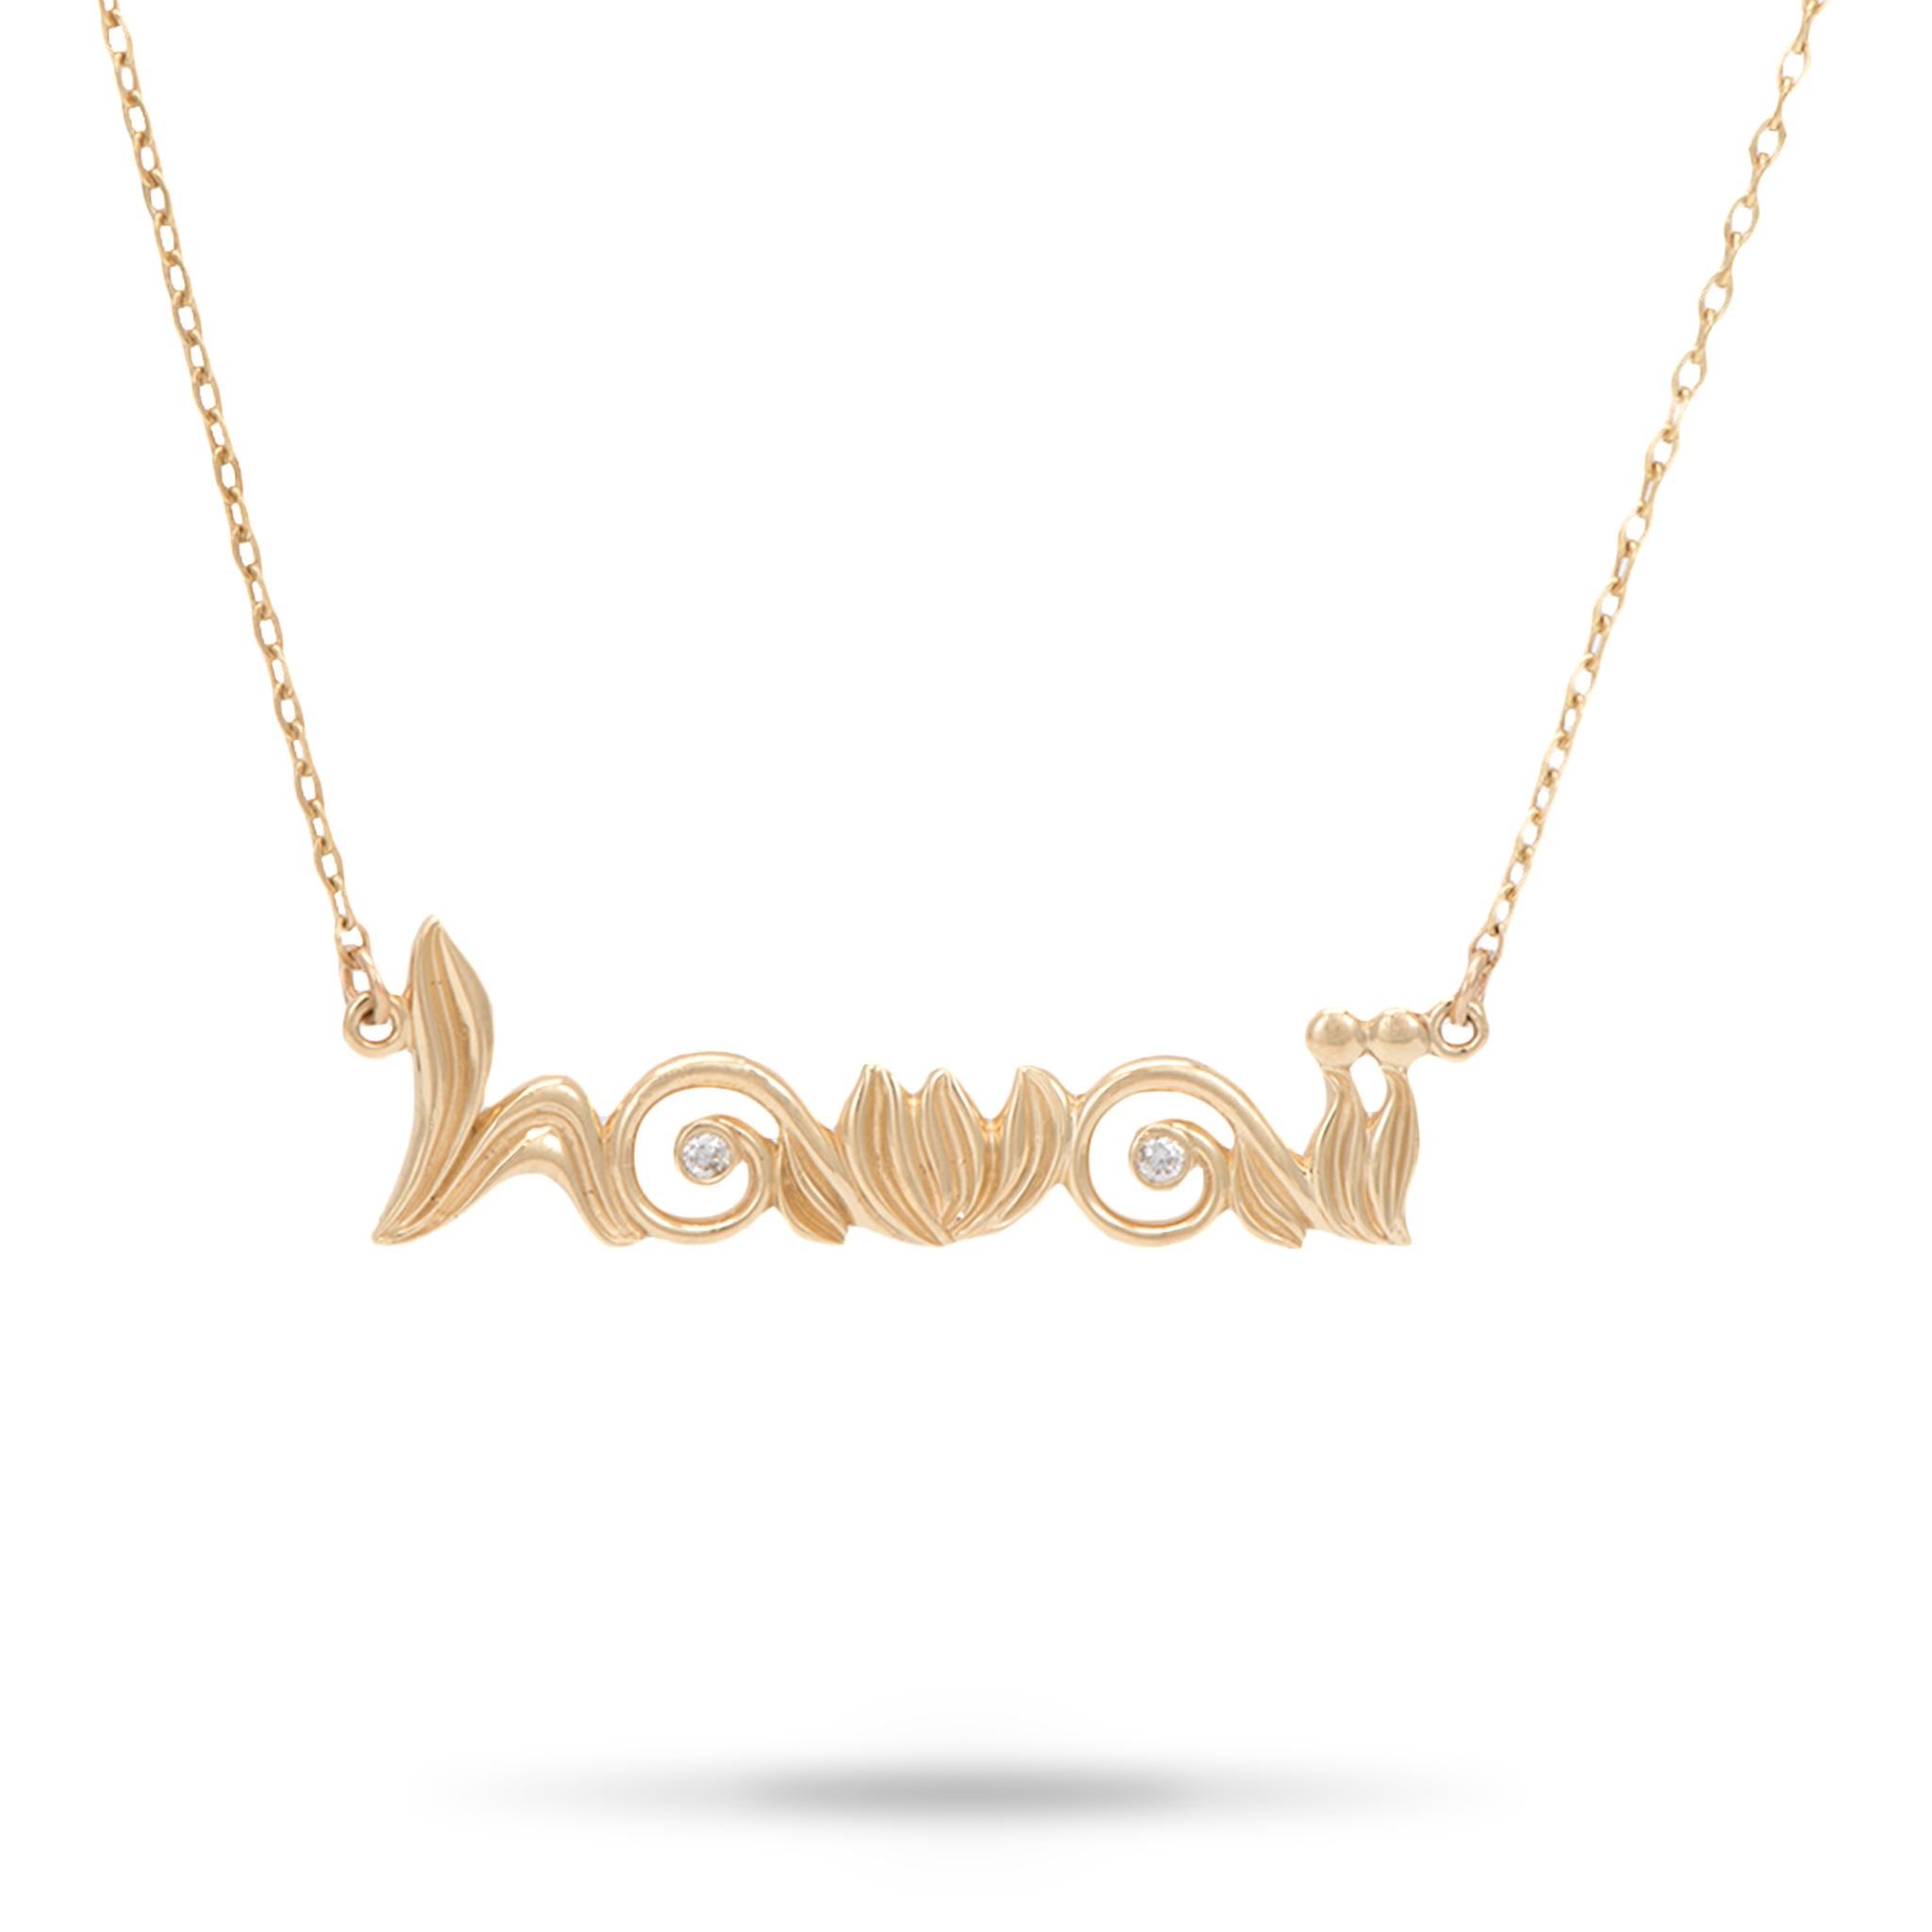 16-18" Adjustable Living Heirloom Hawaii Necklace in Gold with Diamond